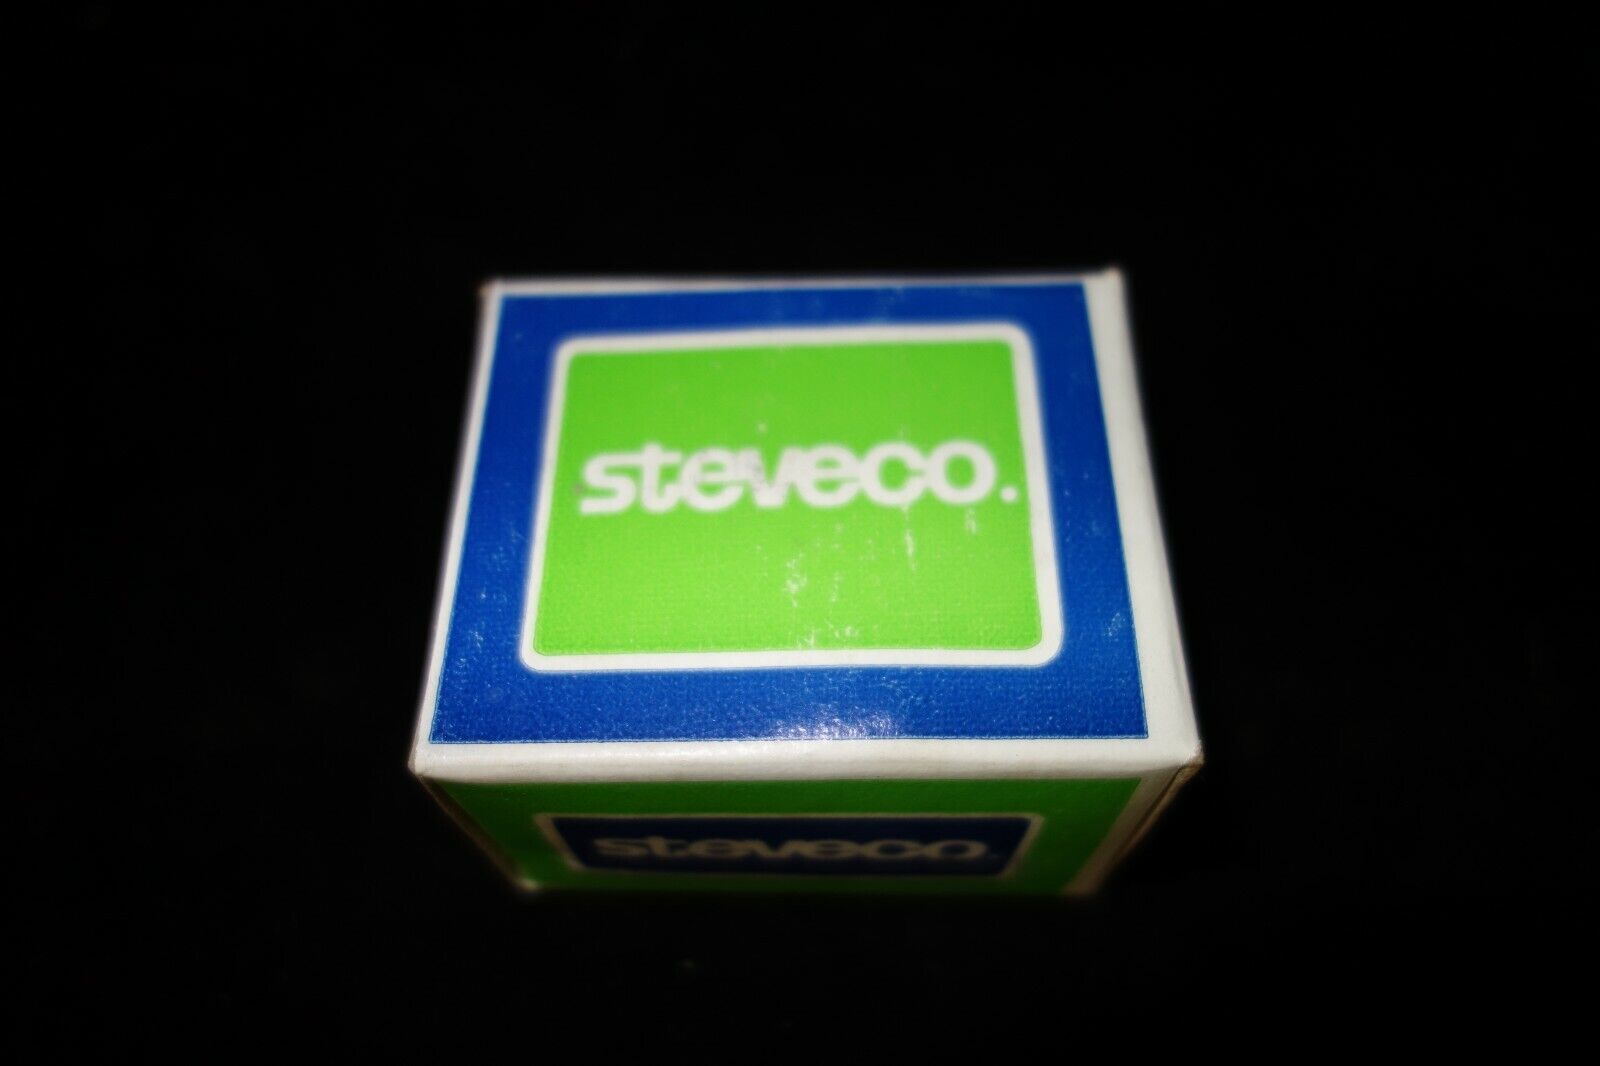 Steveco White-Rodges 90-342 Switching Relay, Type 91, New in the Box